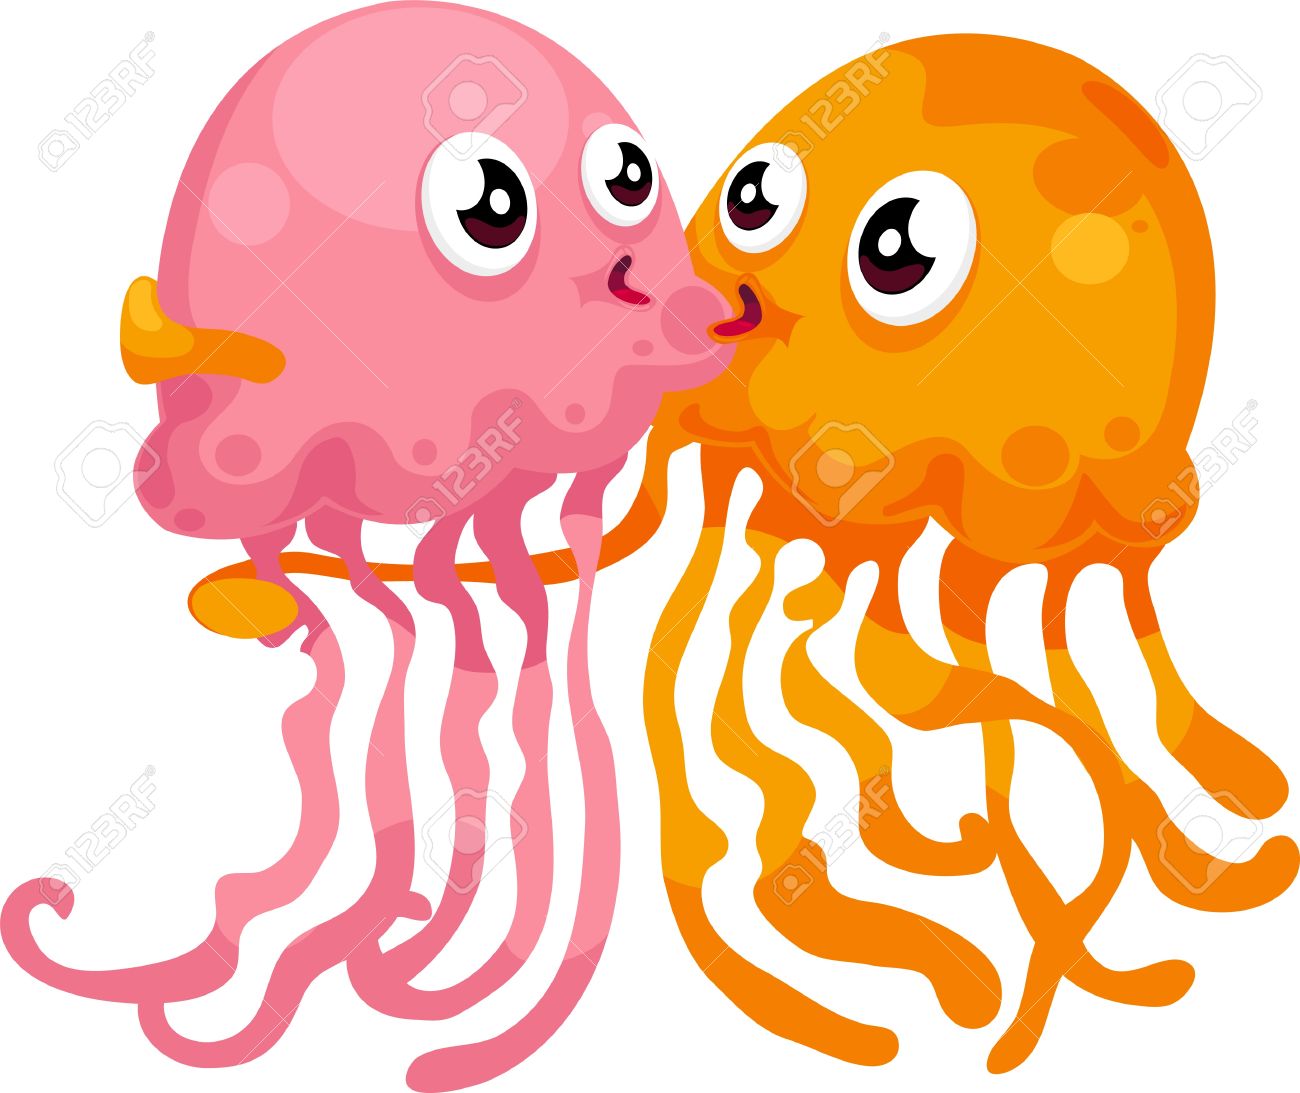 Jellies clipart #15, Download drawings